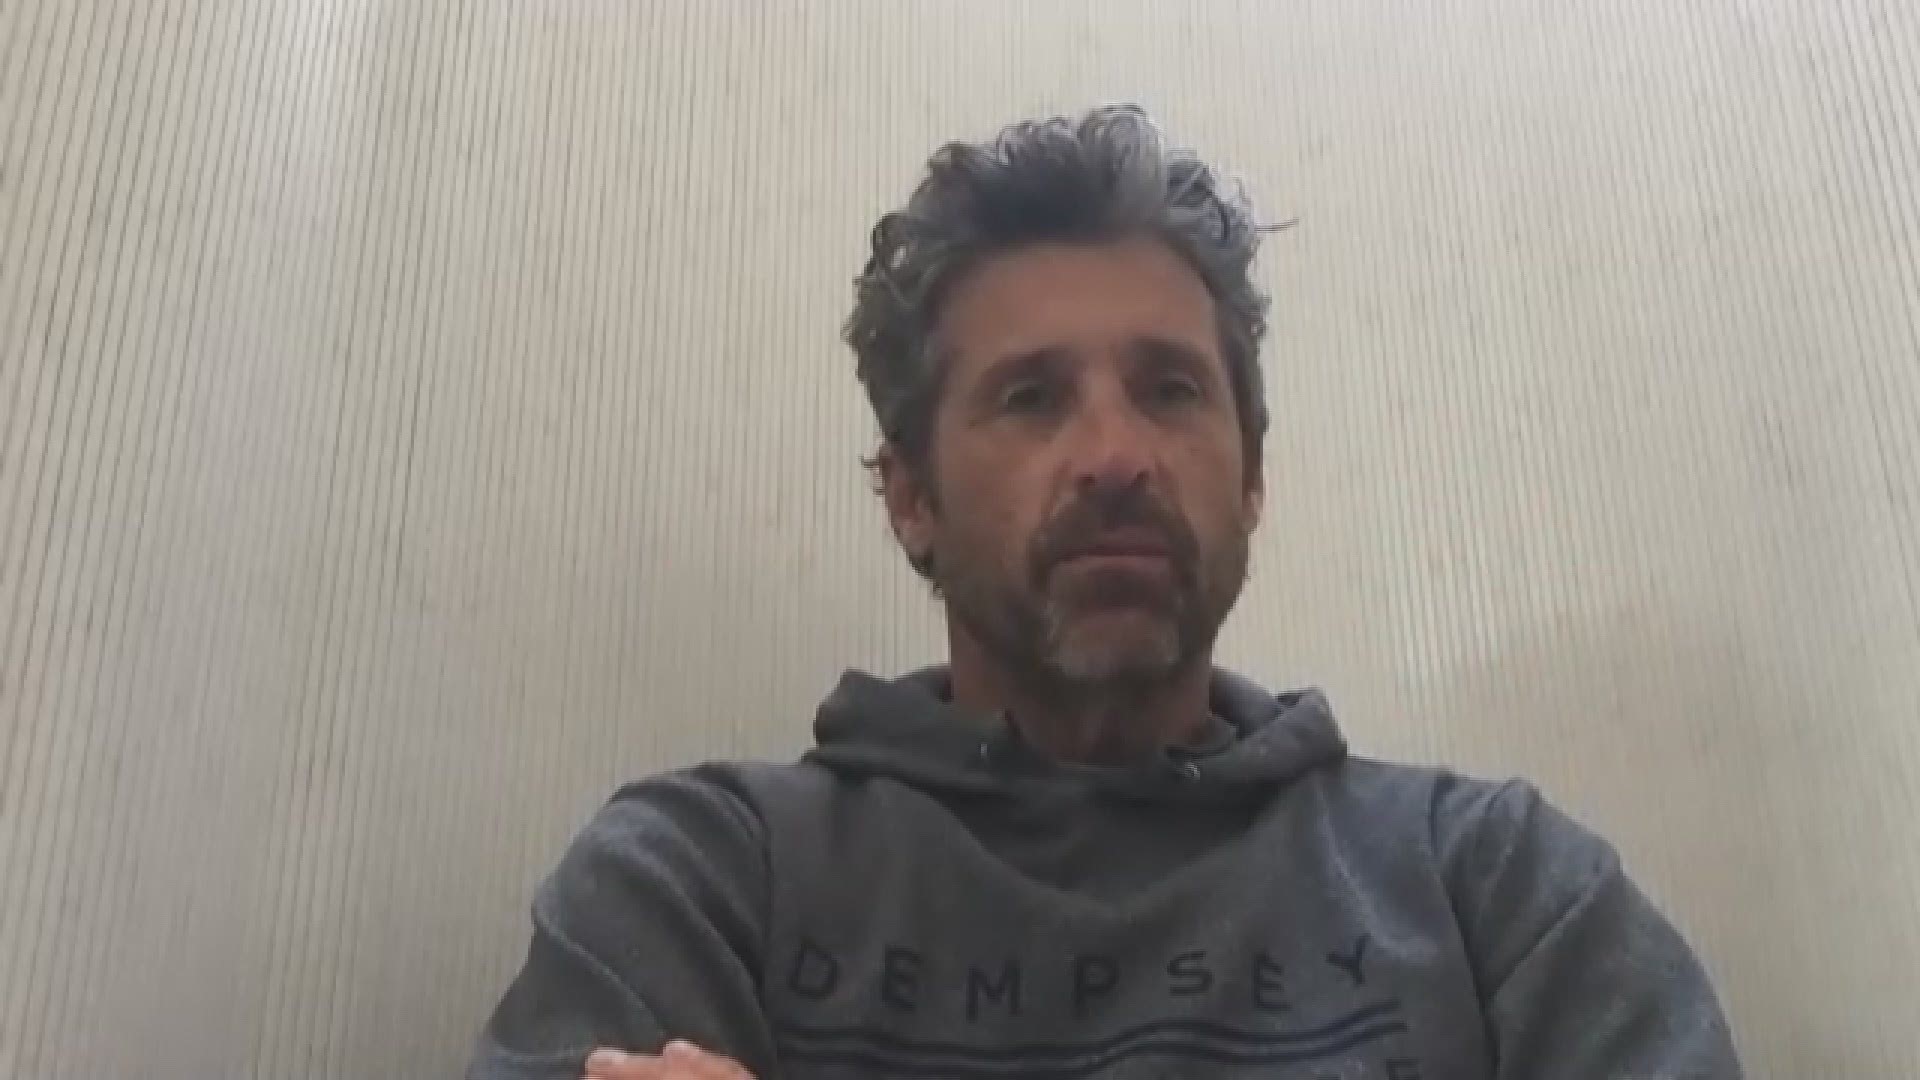 Mainer and actor Patrick Dempsey shares how he and his family have been coping amid the coronavirus pandemic